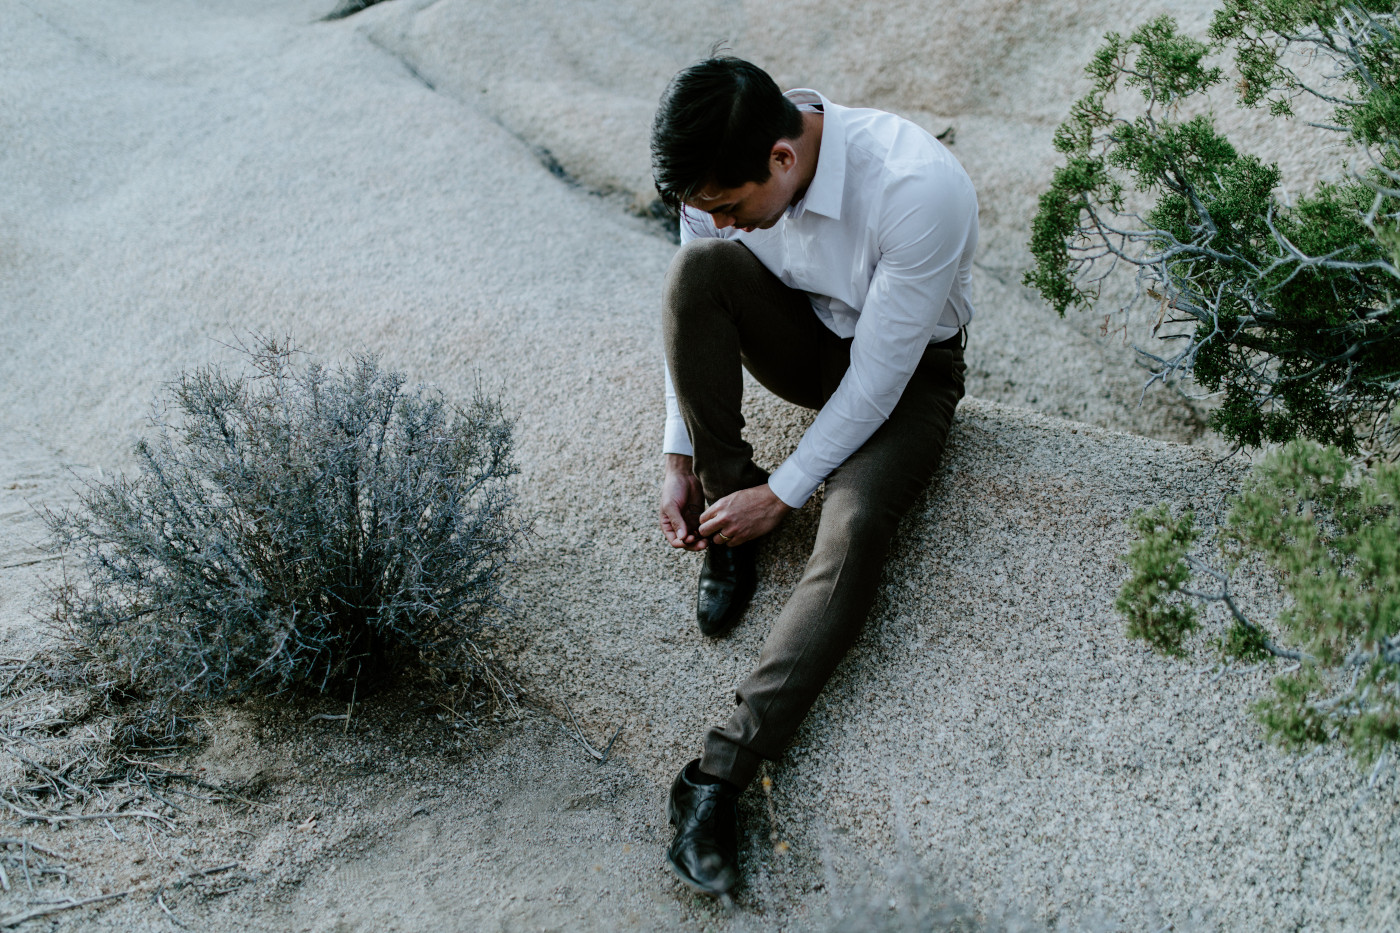 Zack ties his shoe while sitting on a rock in Joshua Tree National Park.